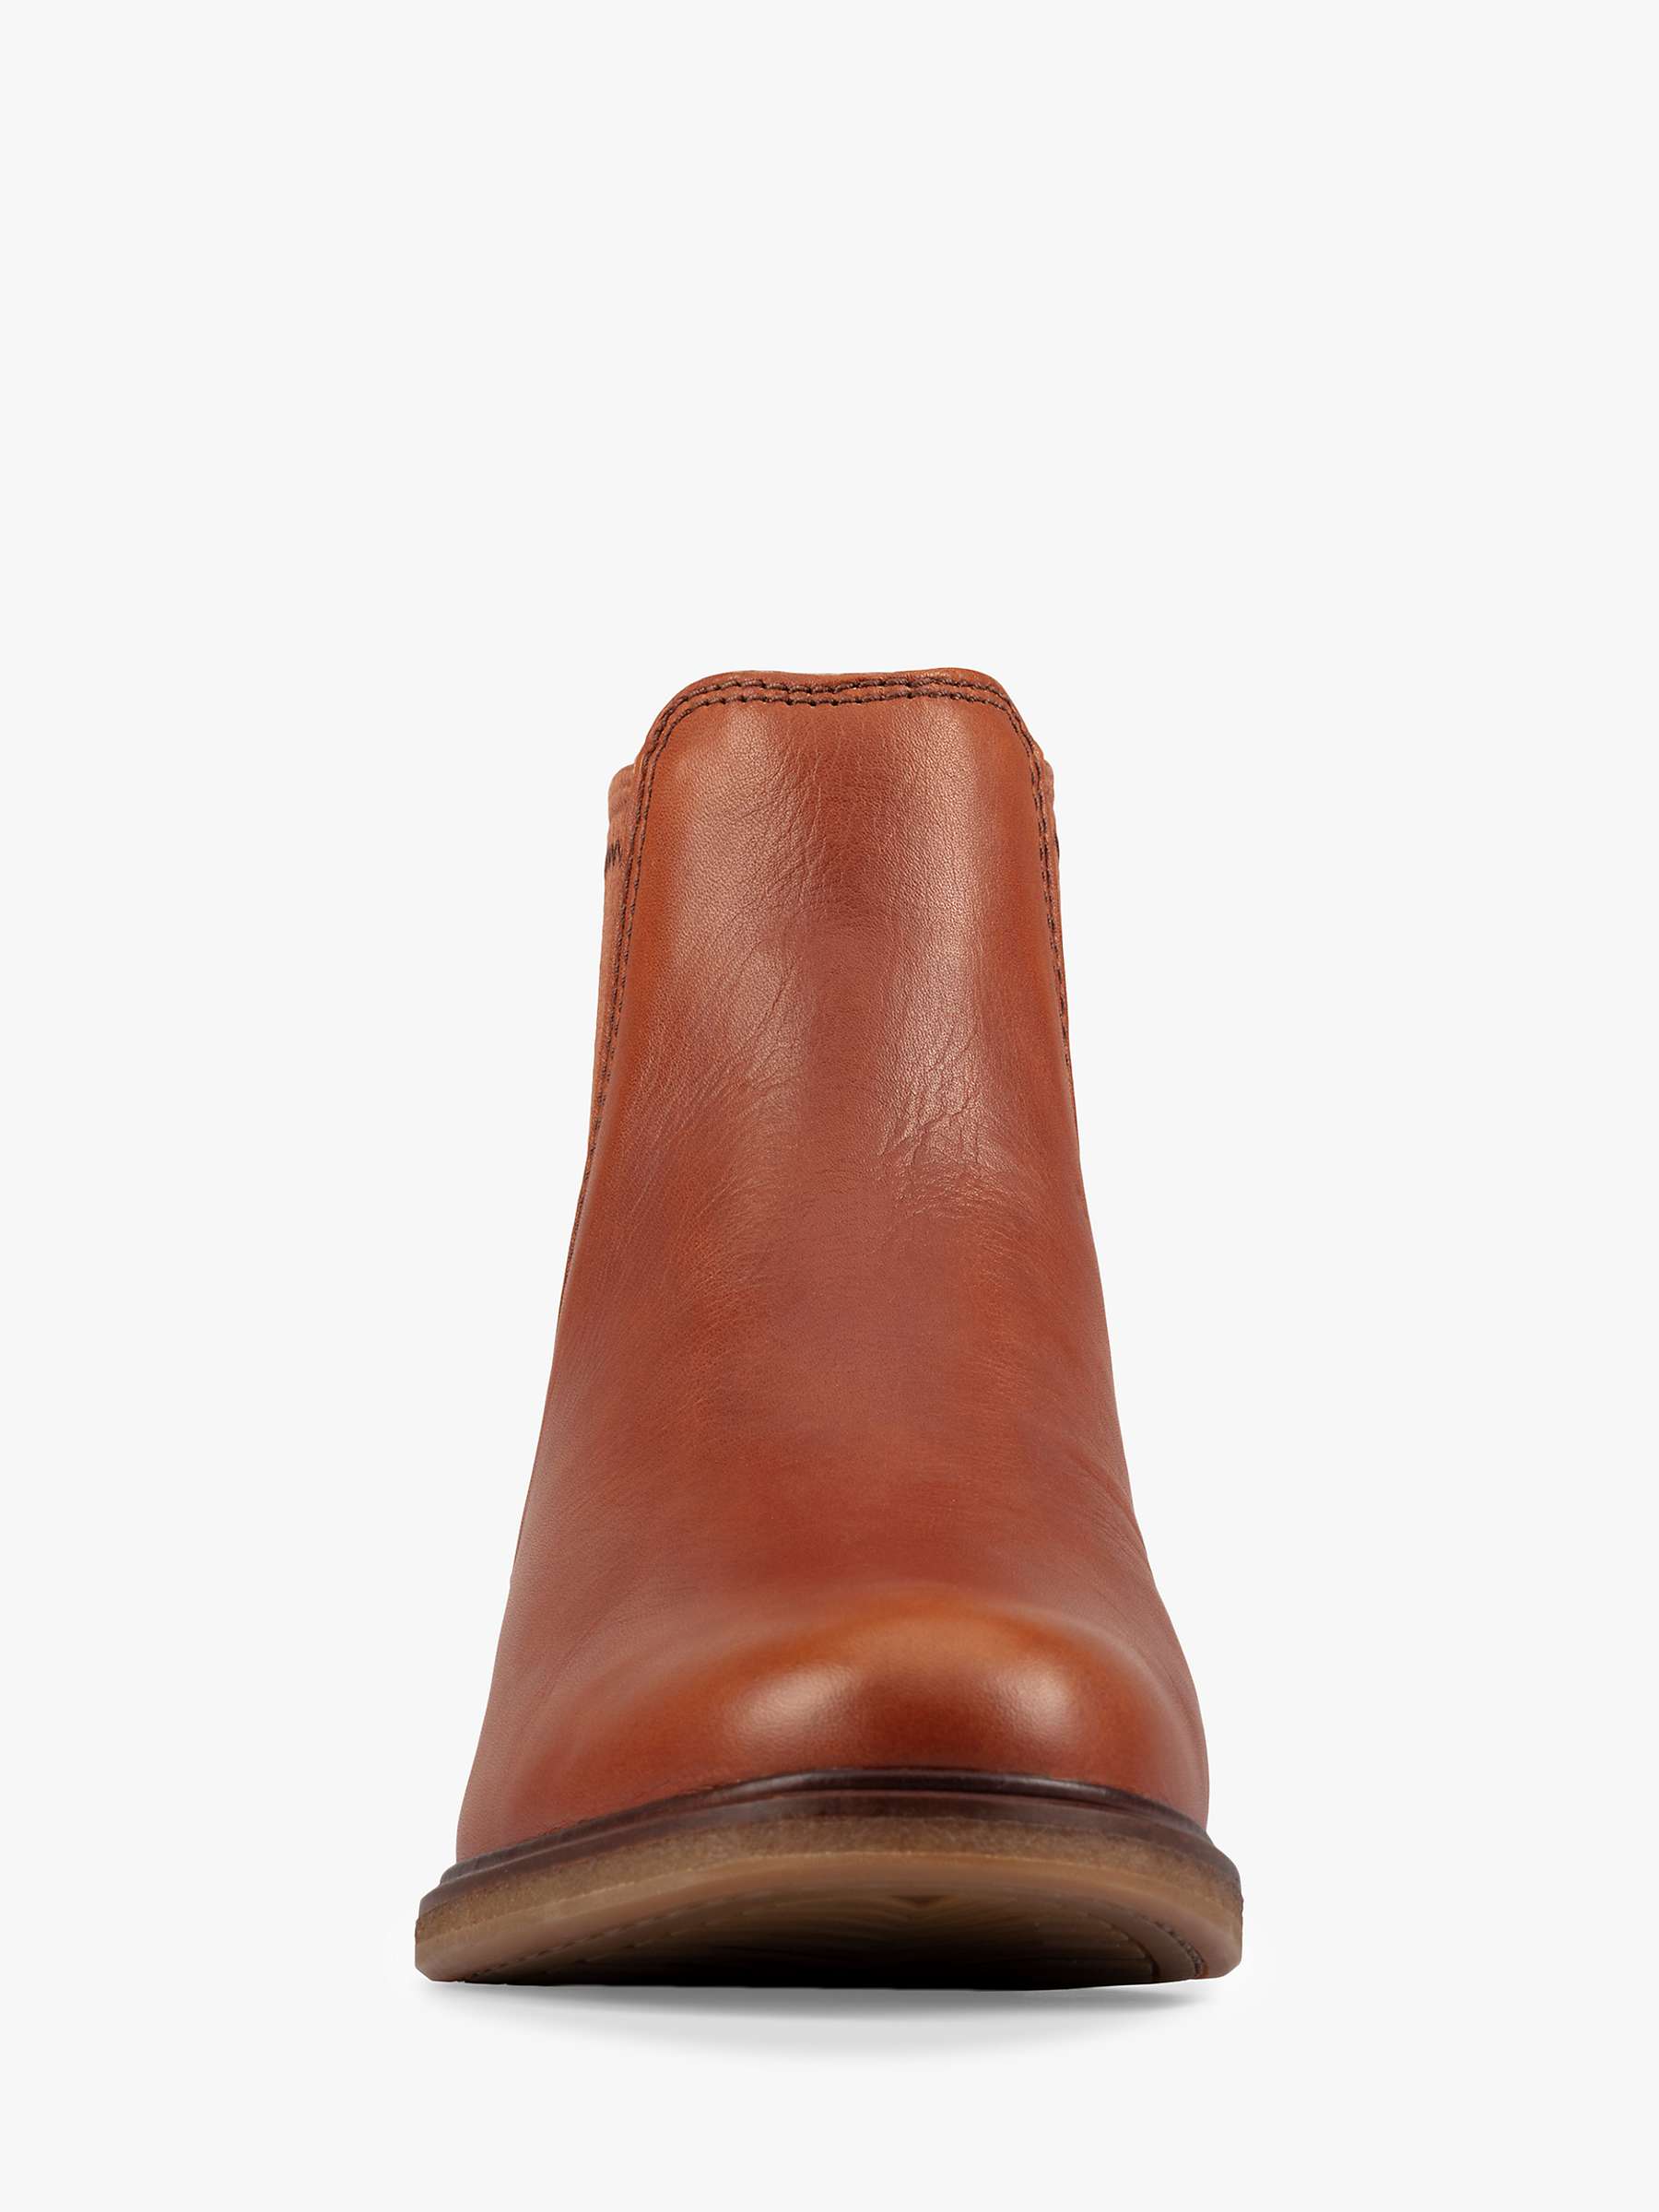 Buy Clarks Clarkdale Arlo Wide Fit Leather Chelsea Boots Online at johnlewis.com